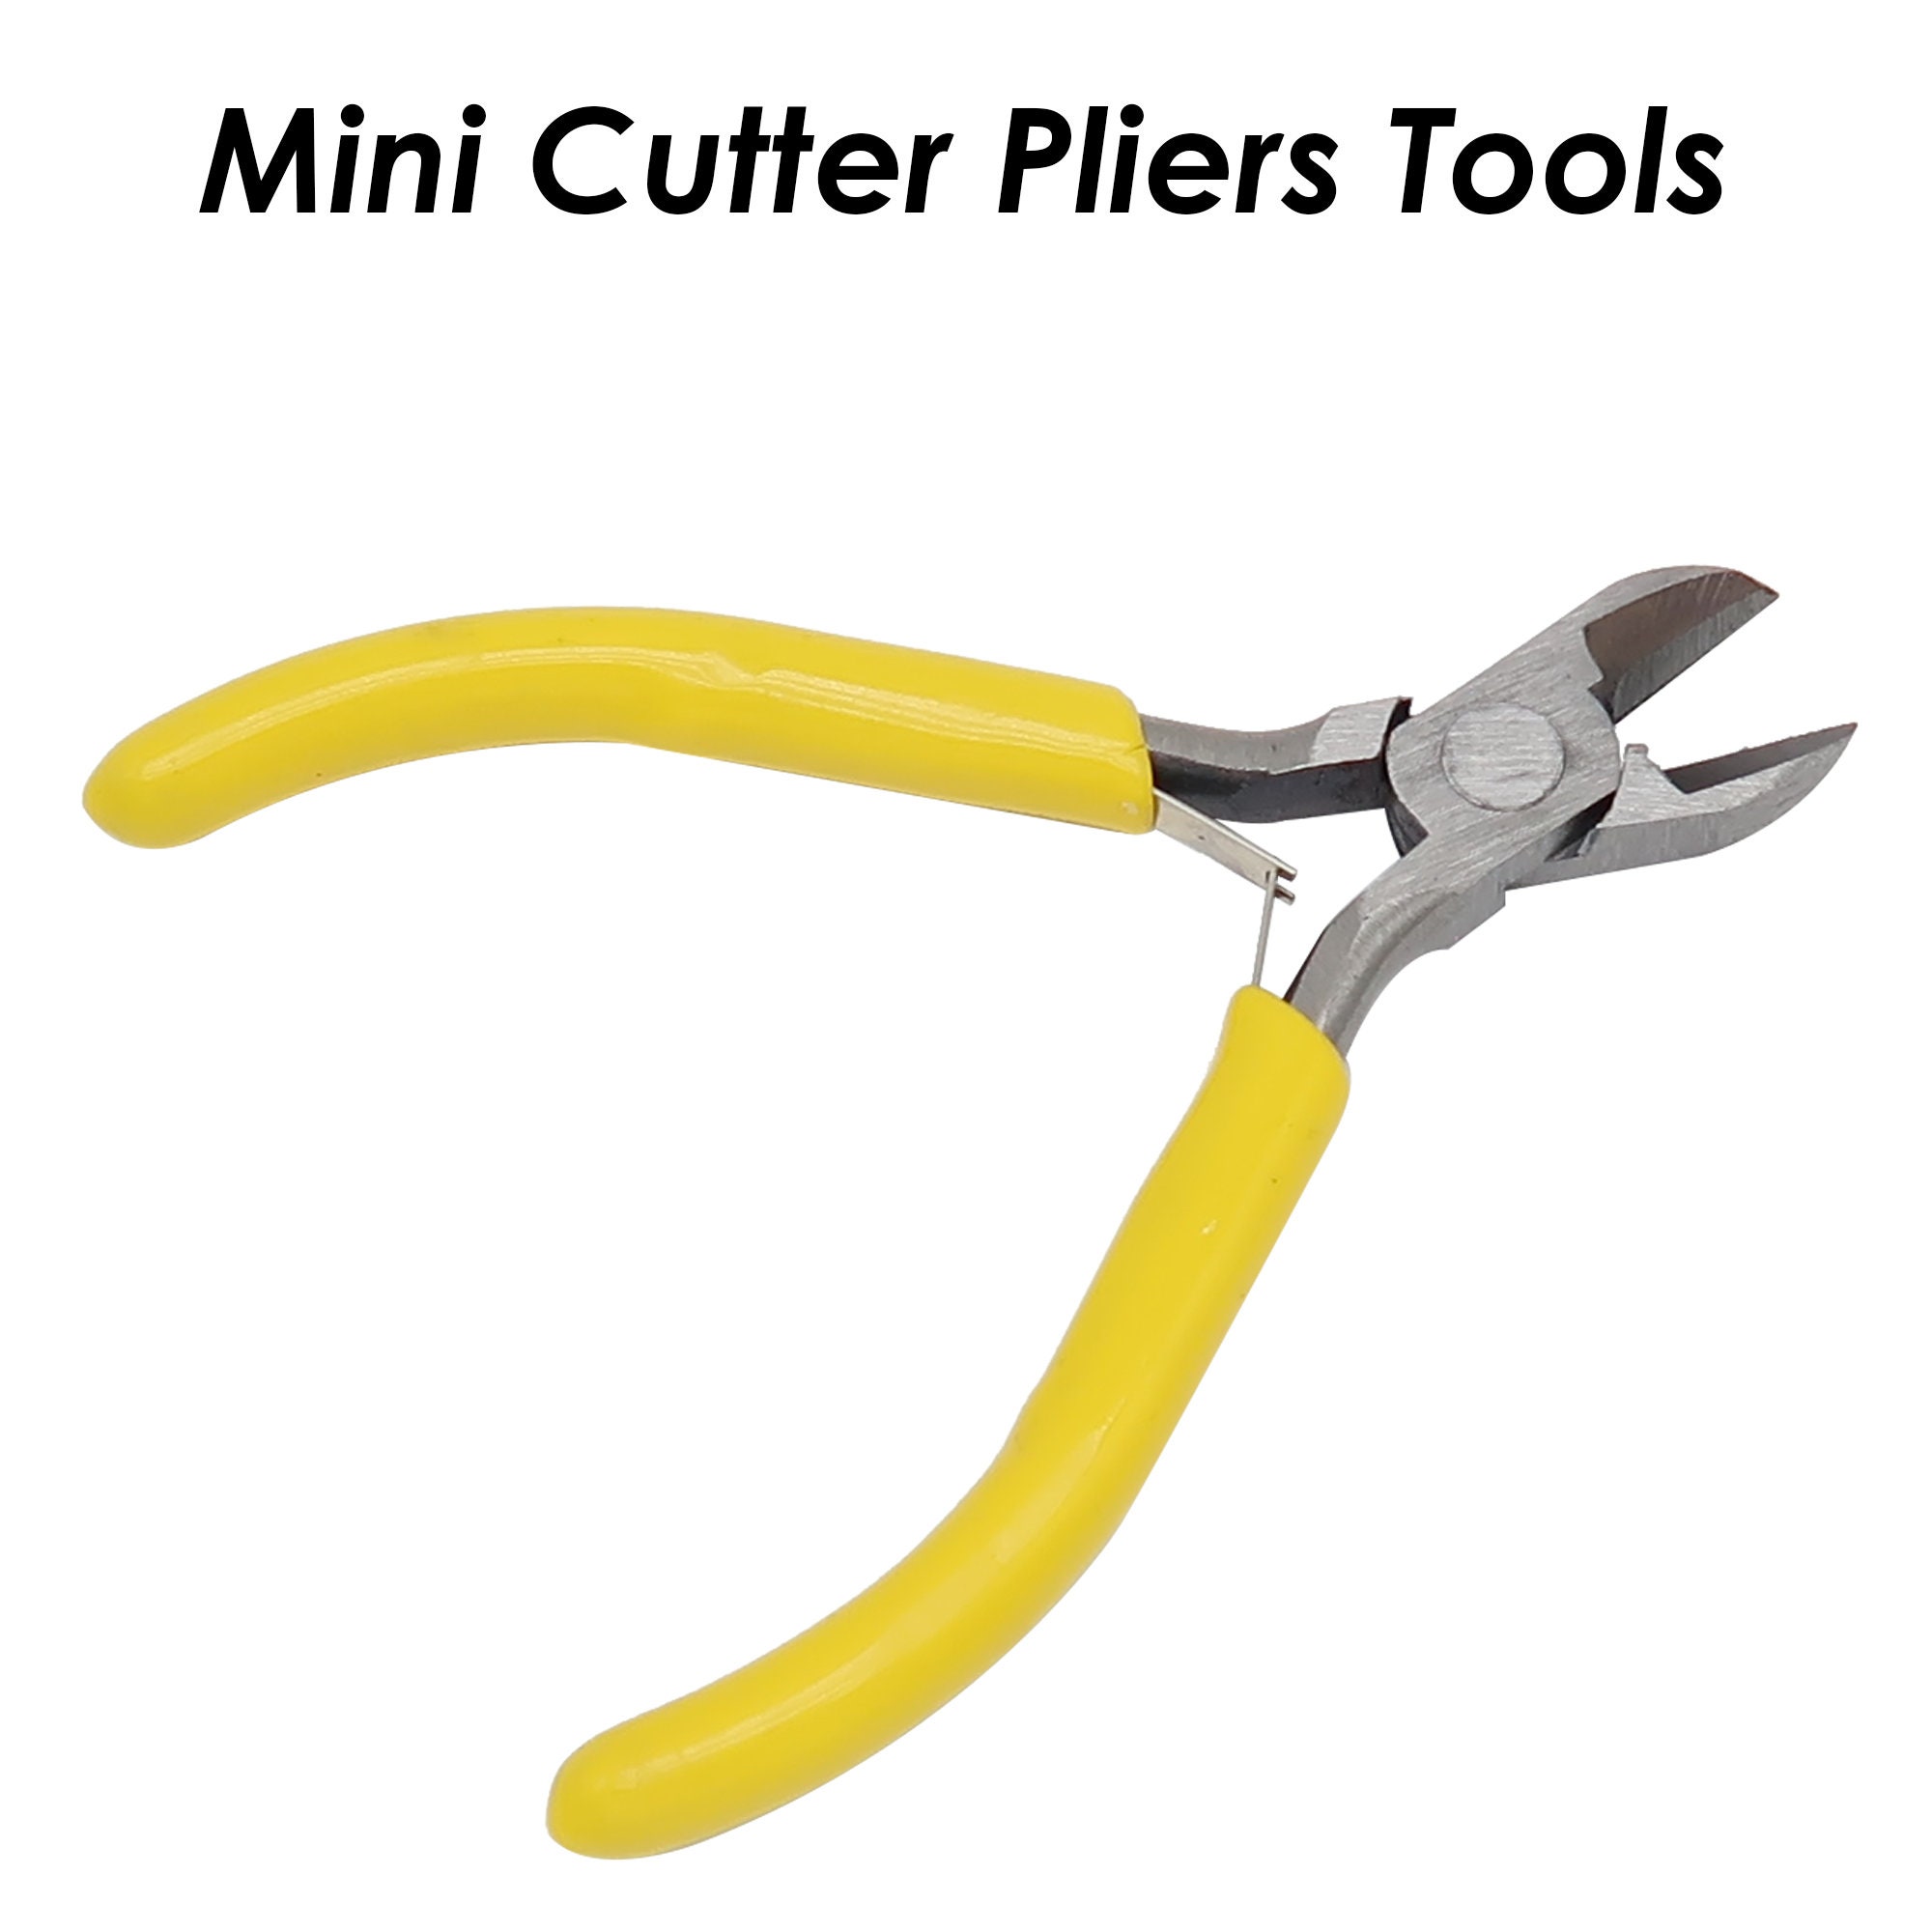 DELI-Electrical Cutting Plier Jewelry Wire Cable Cutter Side Snips Flush  Pliers Tool 